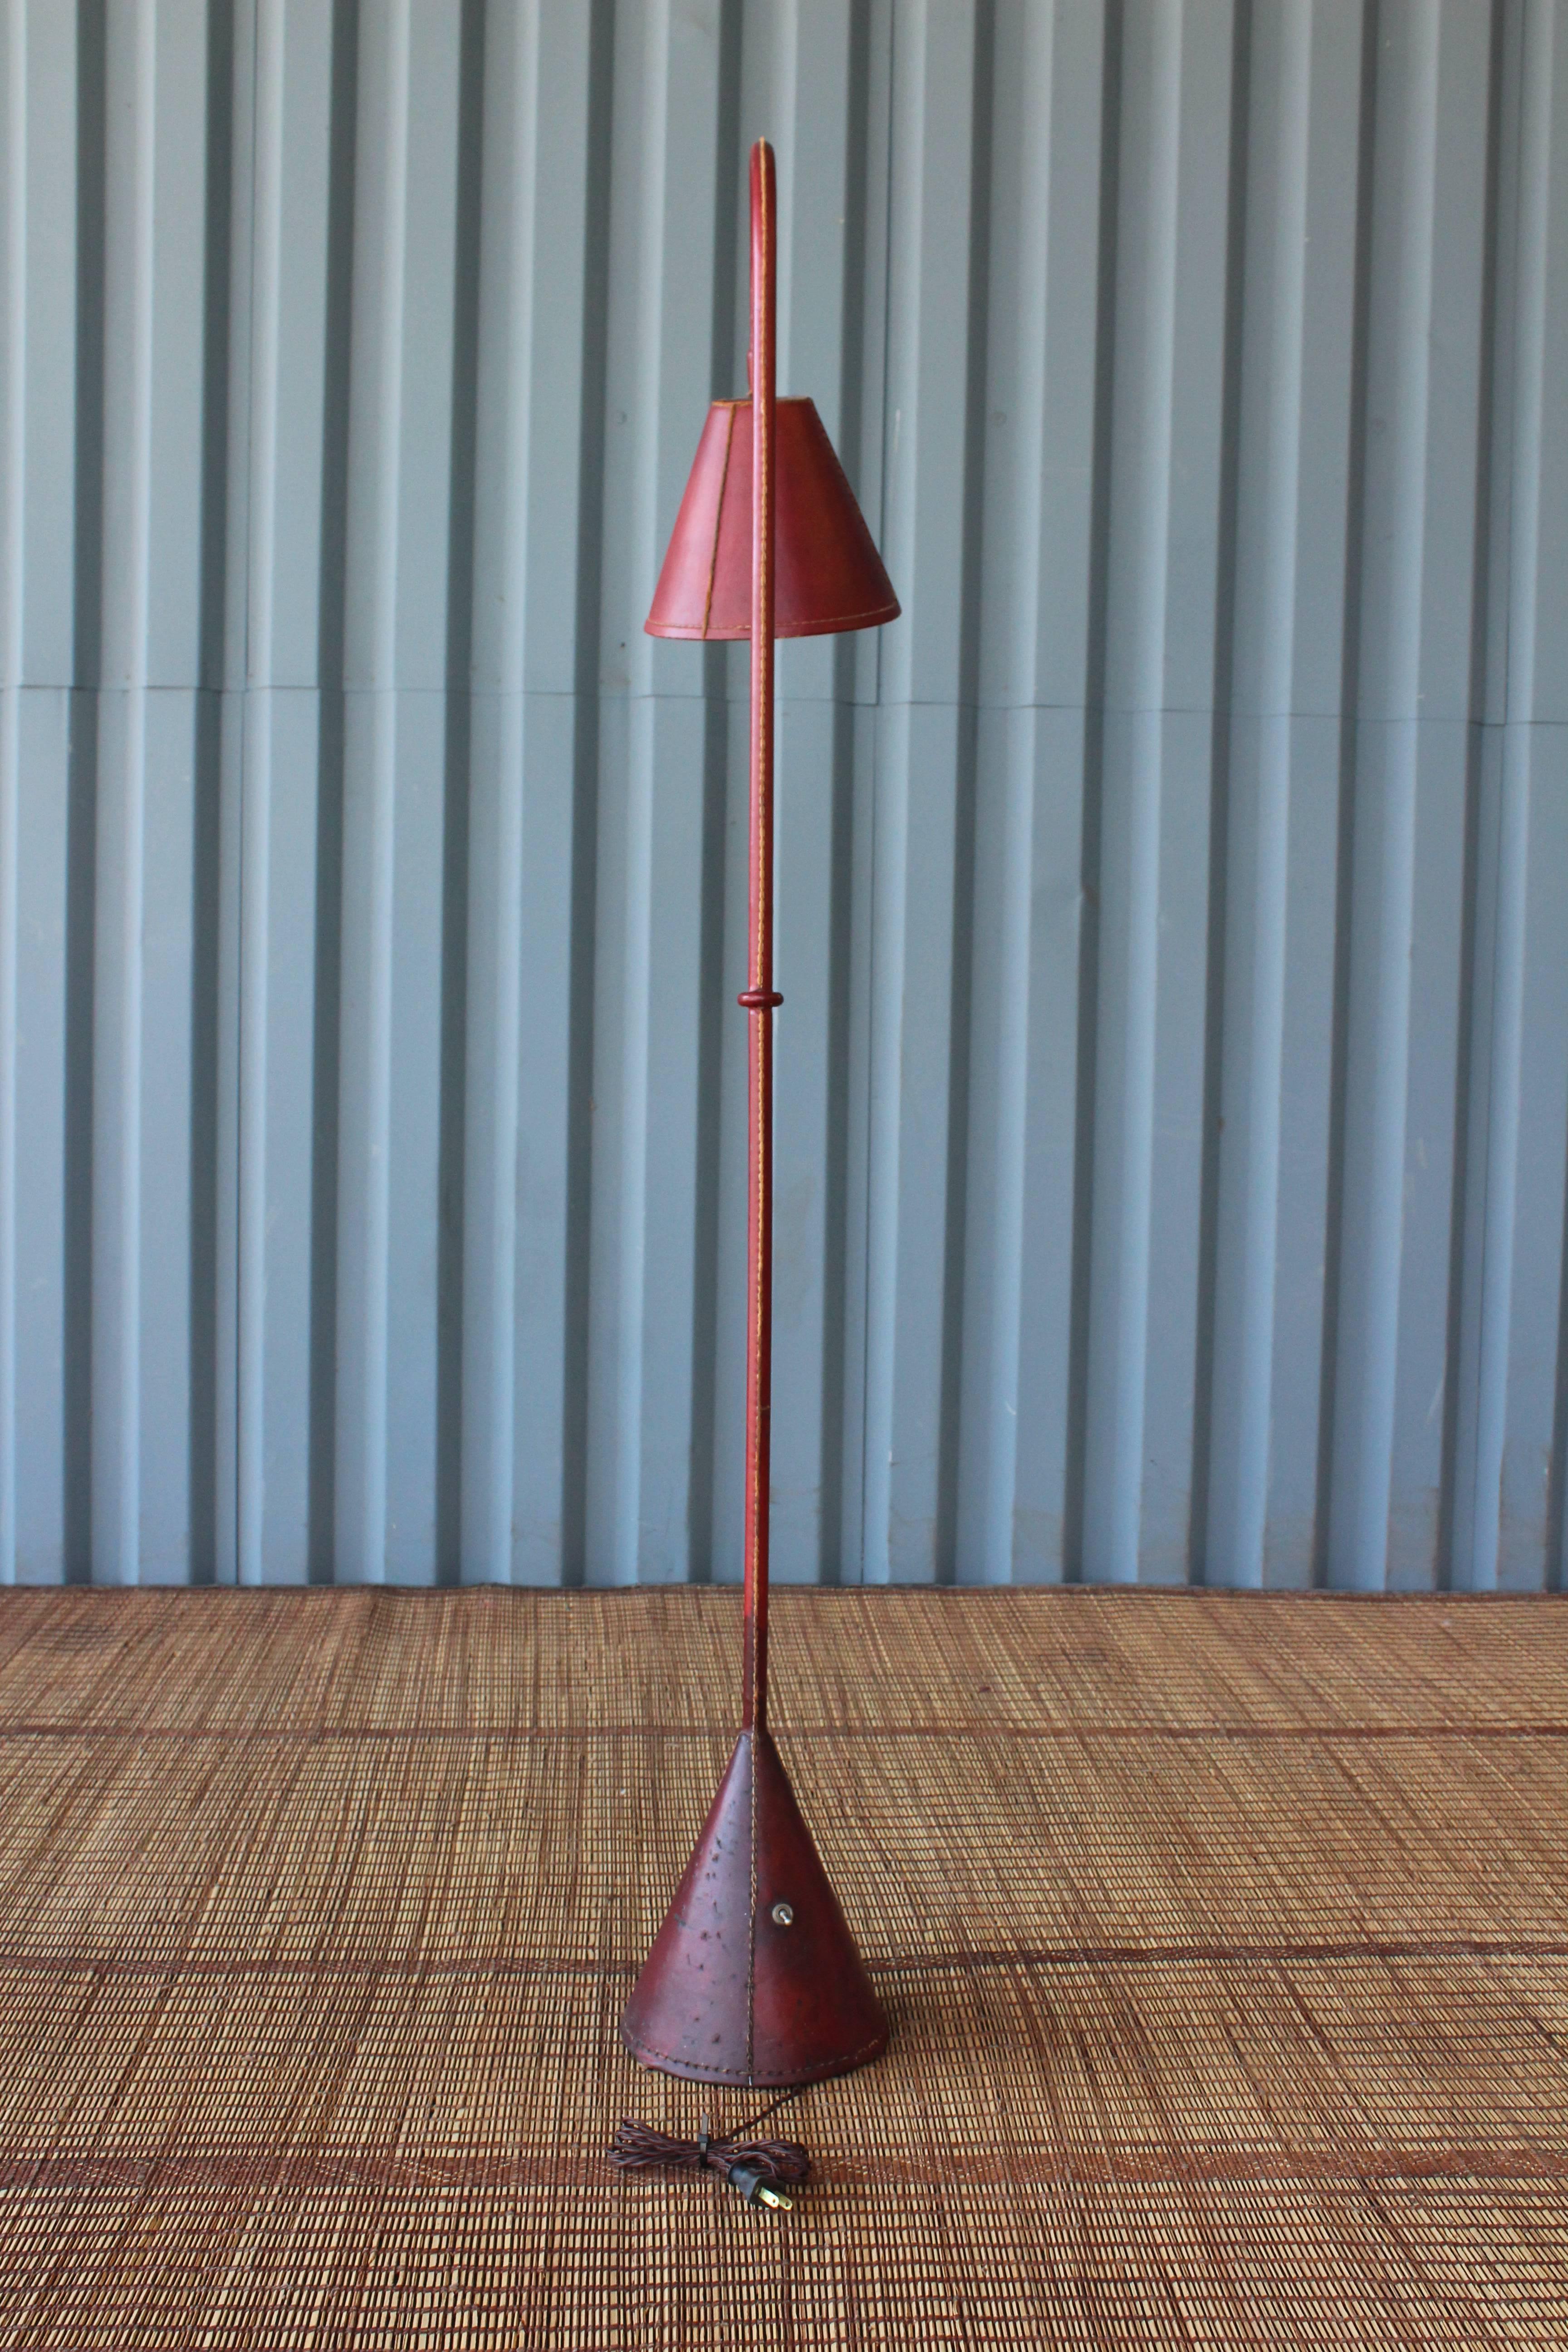 A red leather-wrapped floor lamp by Jacques Adnet, France, 1950s. Leather shows an aged minor age appropriate wear and patina. Newly rewired for U.S standards.